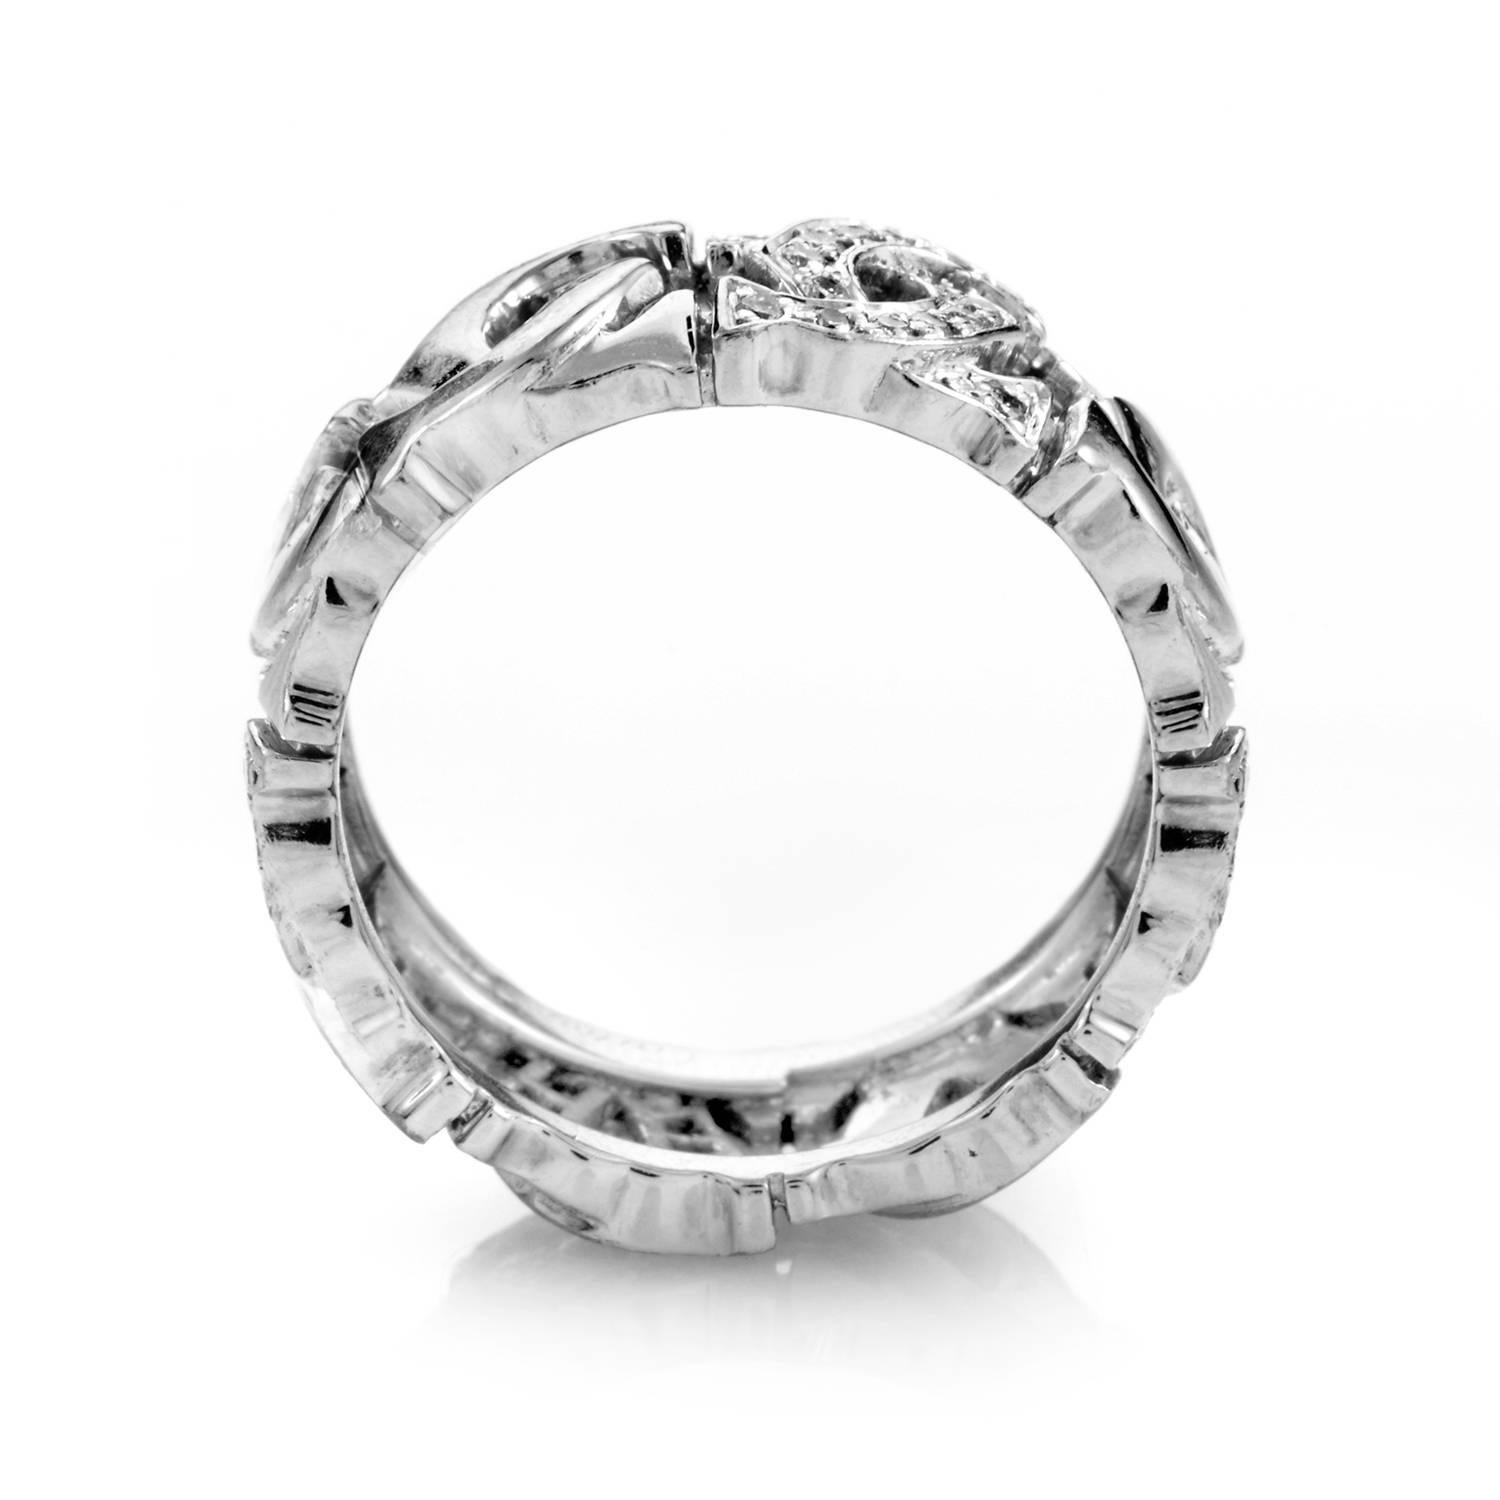 Boasting a never-ending loop of attractively stylized symbols, this outstanding ring from Cartier employs the glaring blend of gleaming 18K white gold and glittering diamonds for a special touch of sparkling allure.
Included Items: Manufacturer's